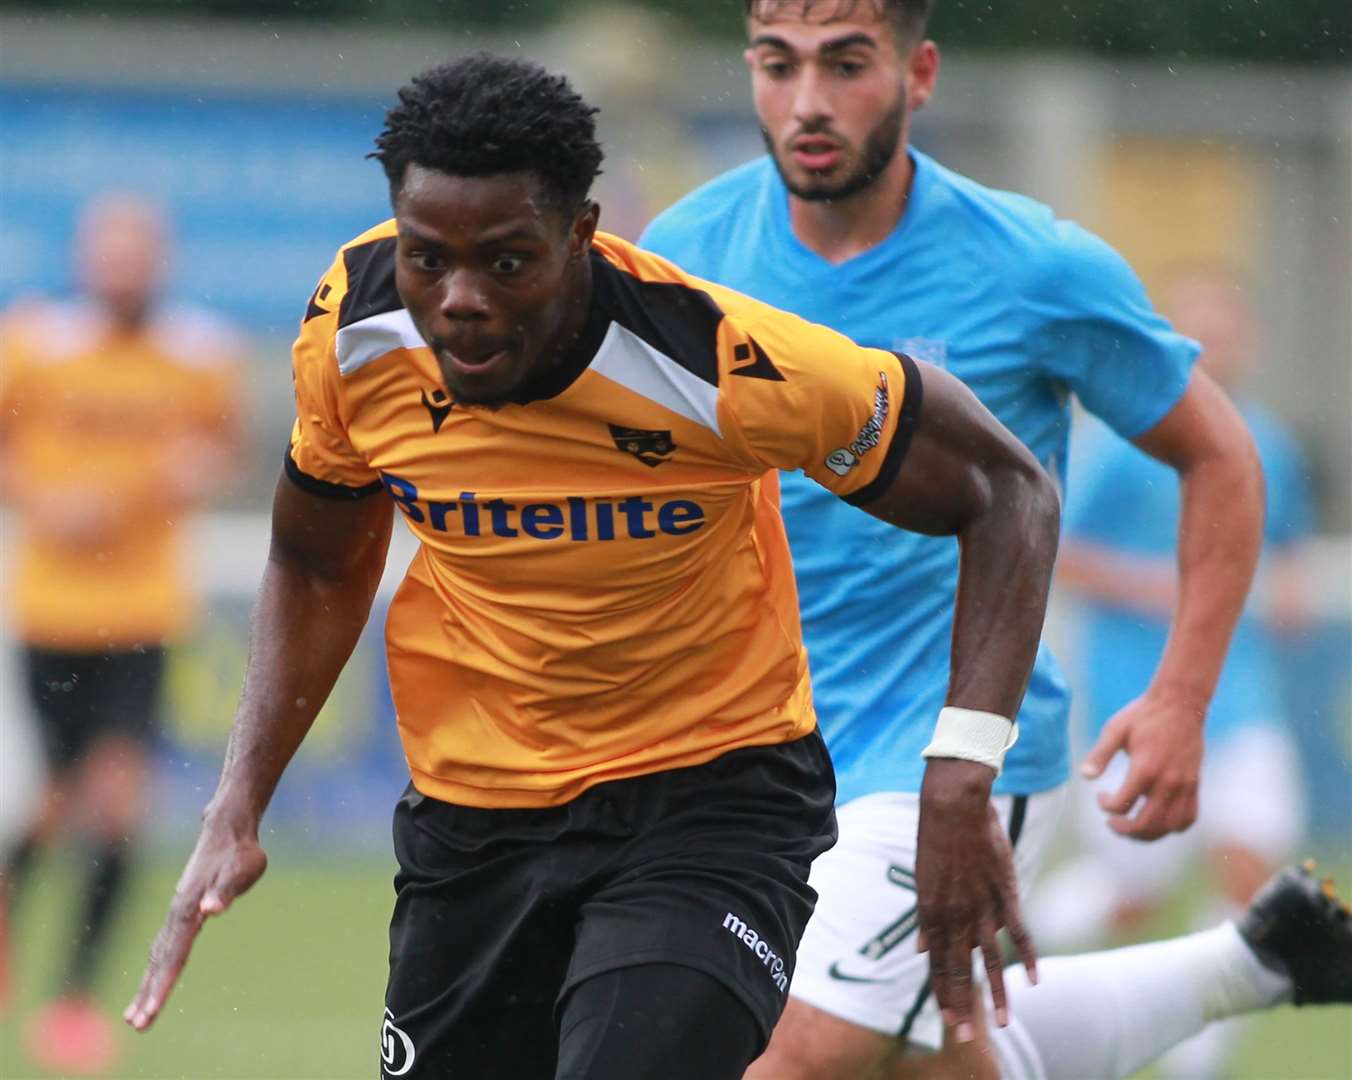 Maidstone winger Justin Amaluzor scored a hat-trick against Southend U23s Picture: John Westhrop